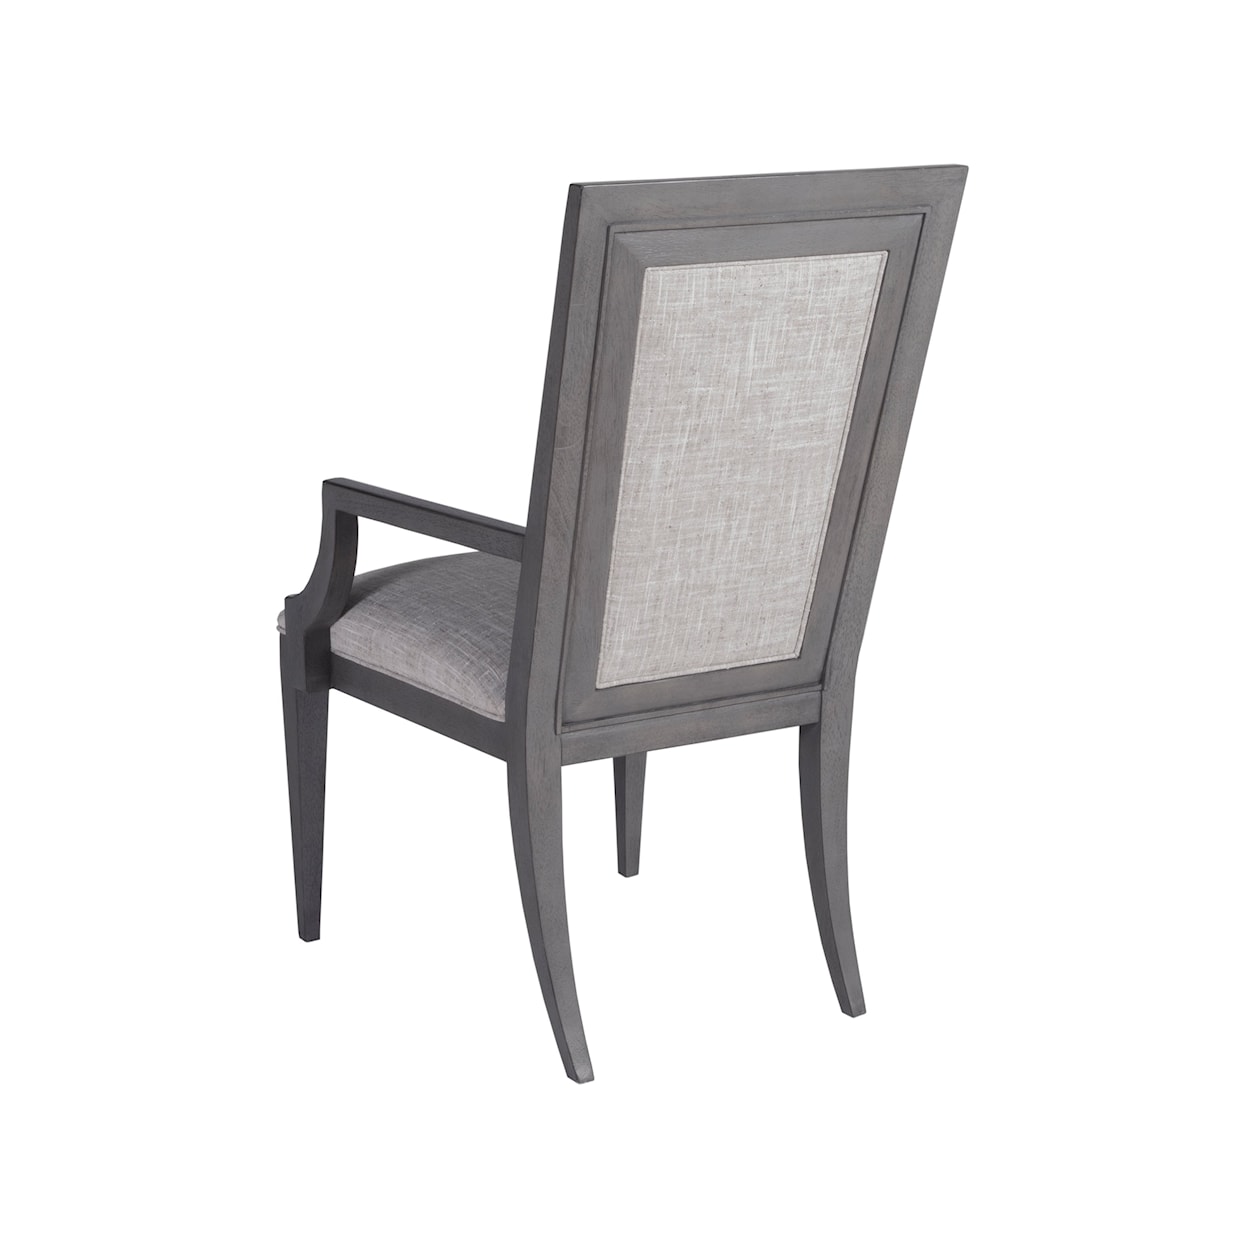 Artistica Appellation Upholstered Arm Chair